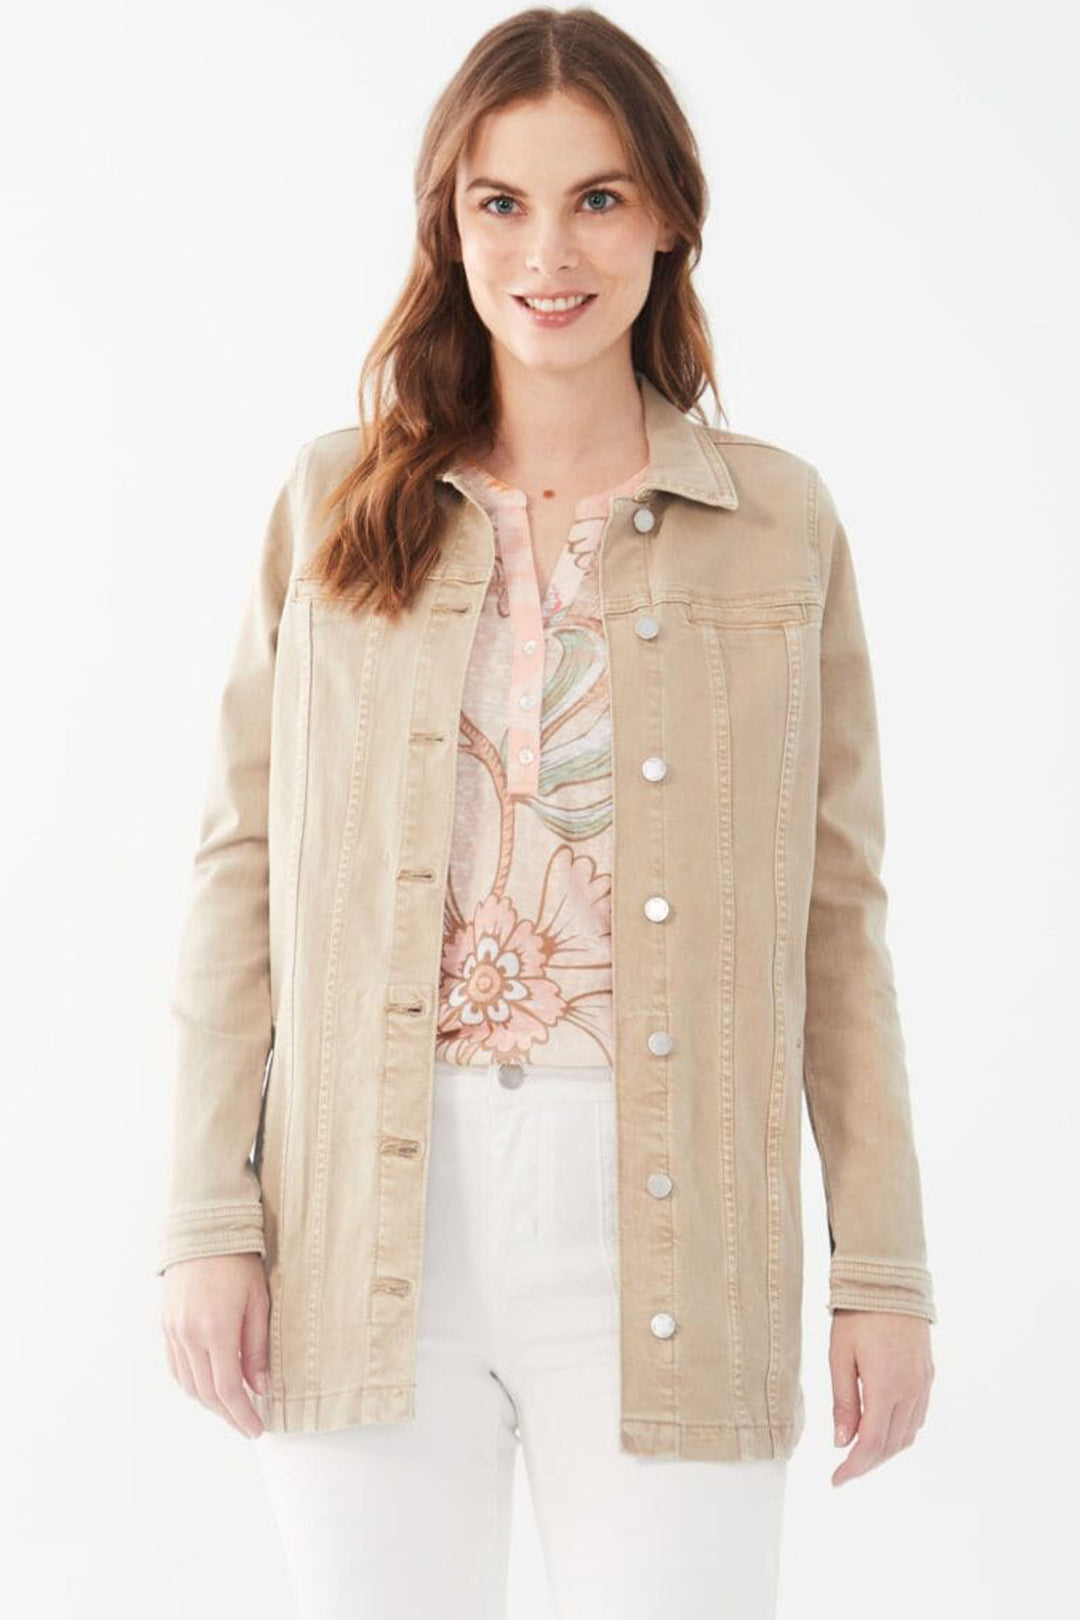 FDJ Spring 2024 This Long Jean Jacket has a button front closure, a soft blend of cotton and polyester, a spread collar and high stretch fabrics. 